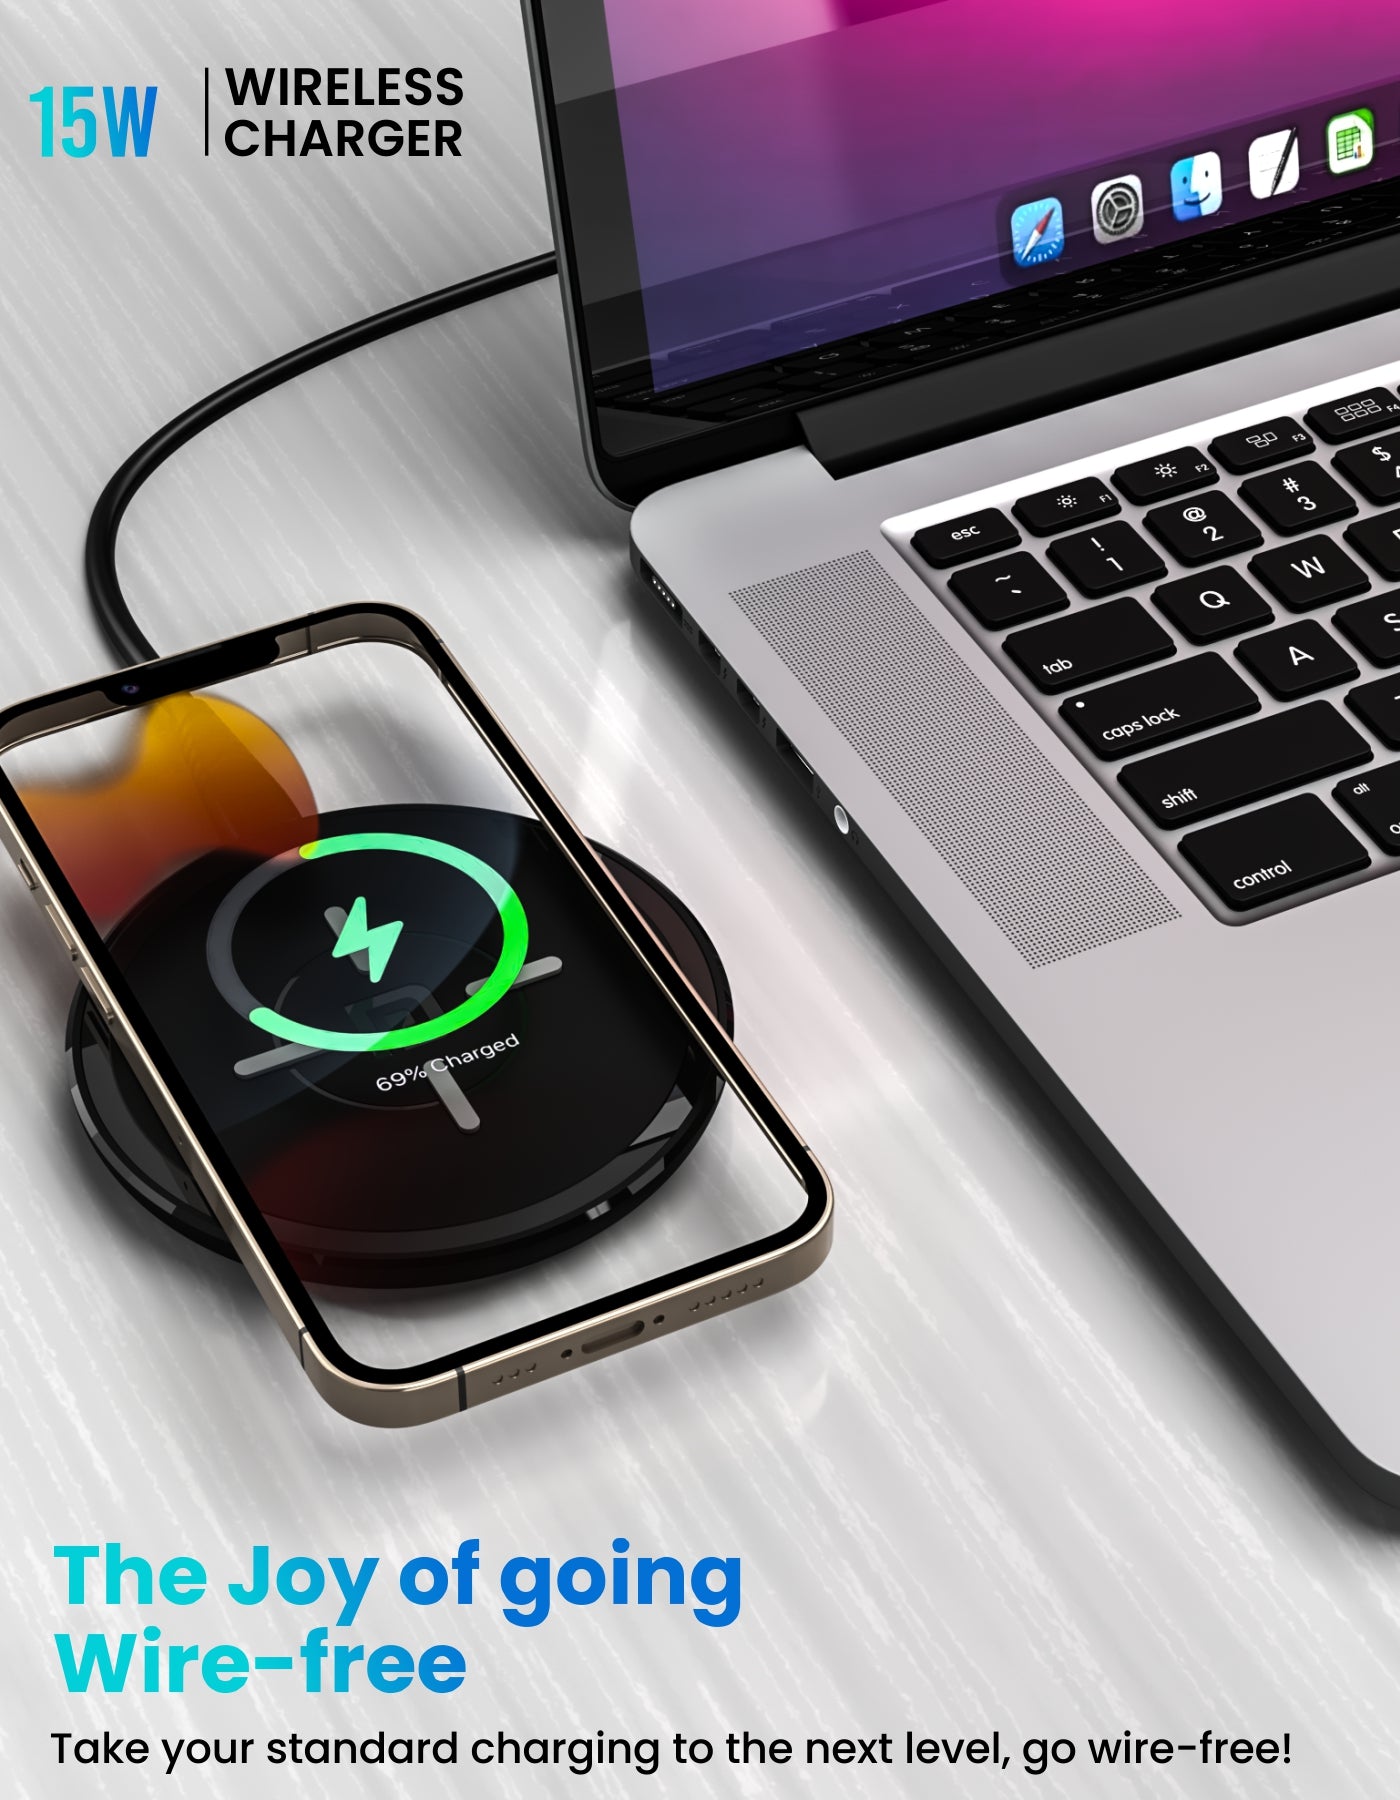 Portronics Freedom 2 Wireless Charger steamless wireless charging